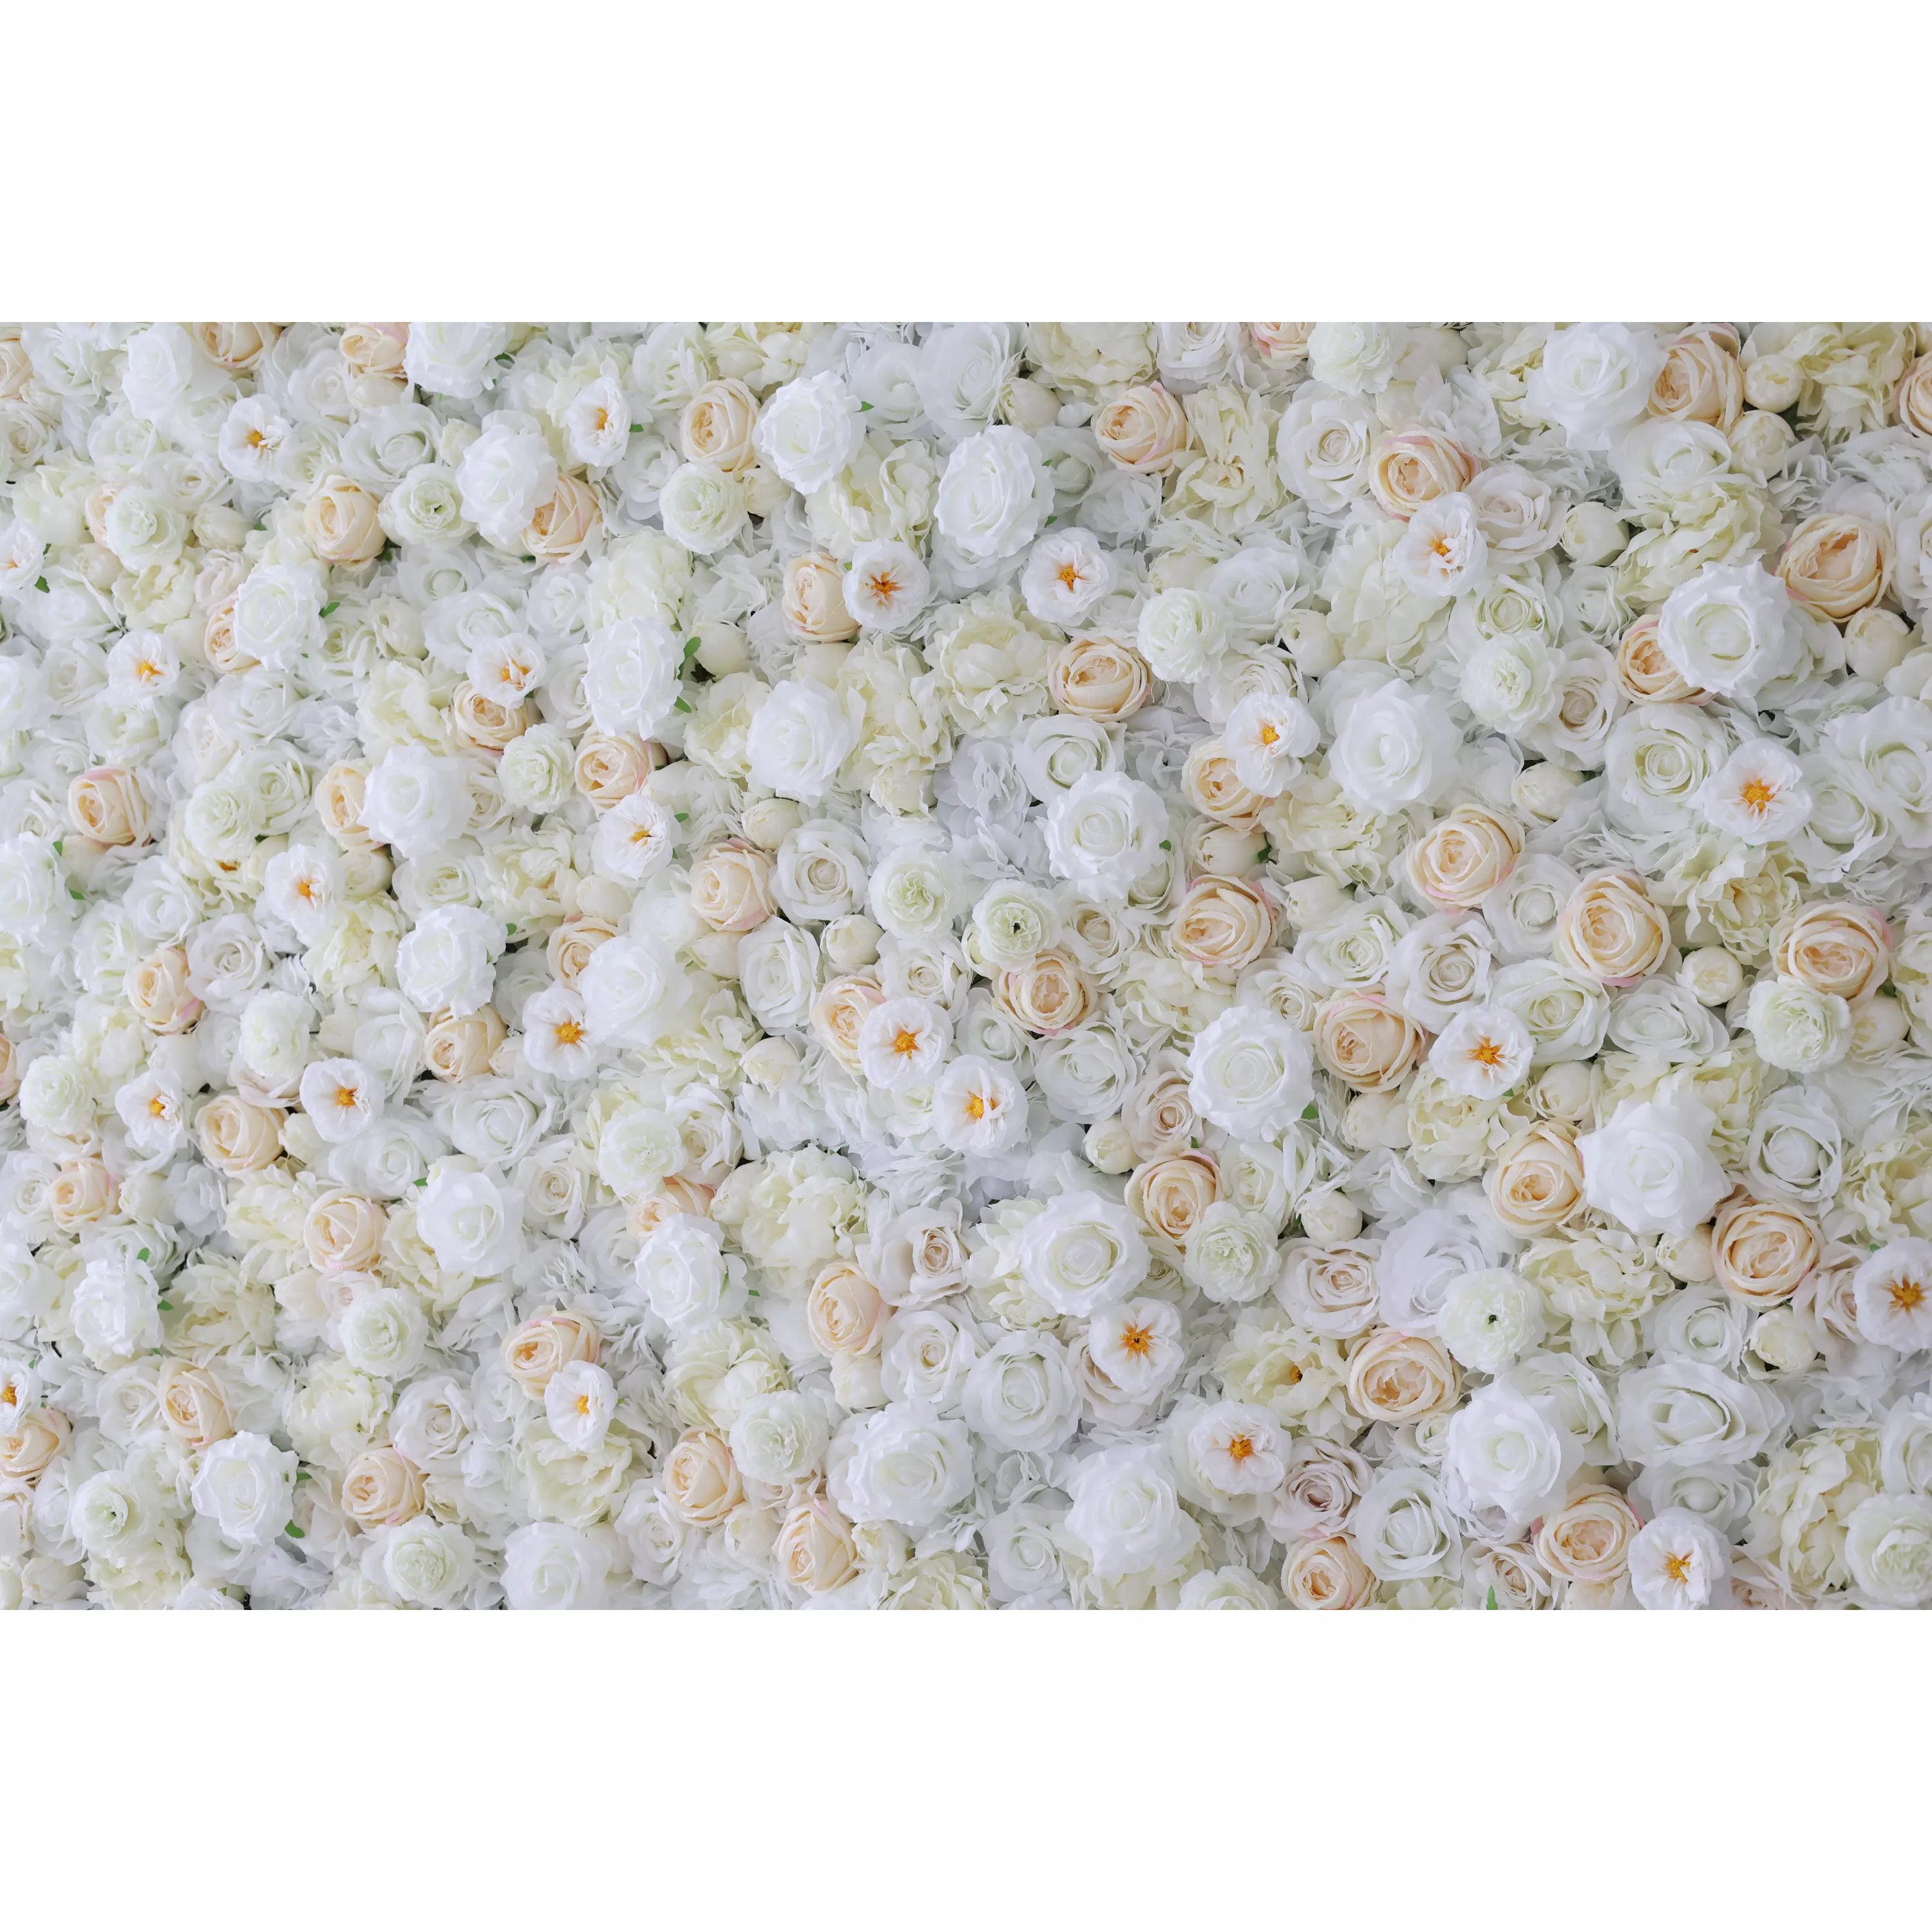 ValarFlowers Artificial Floral Wall Backdrop: Whispering White - The Ethereal Elegance Collection-VF-263